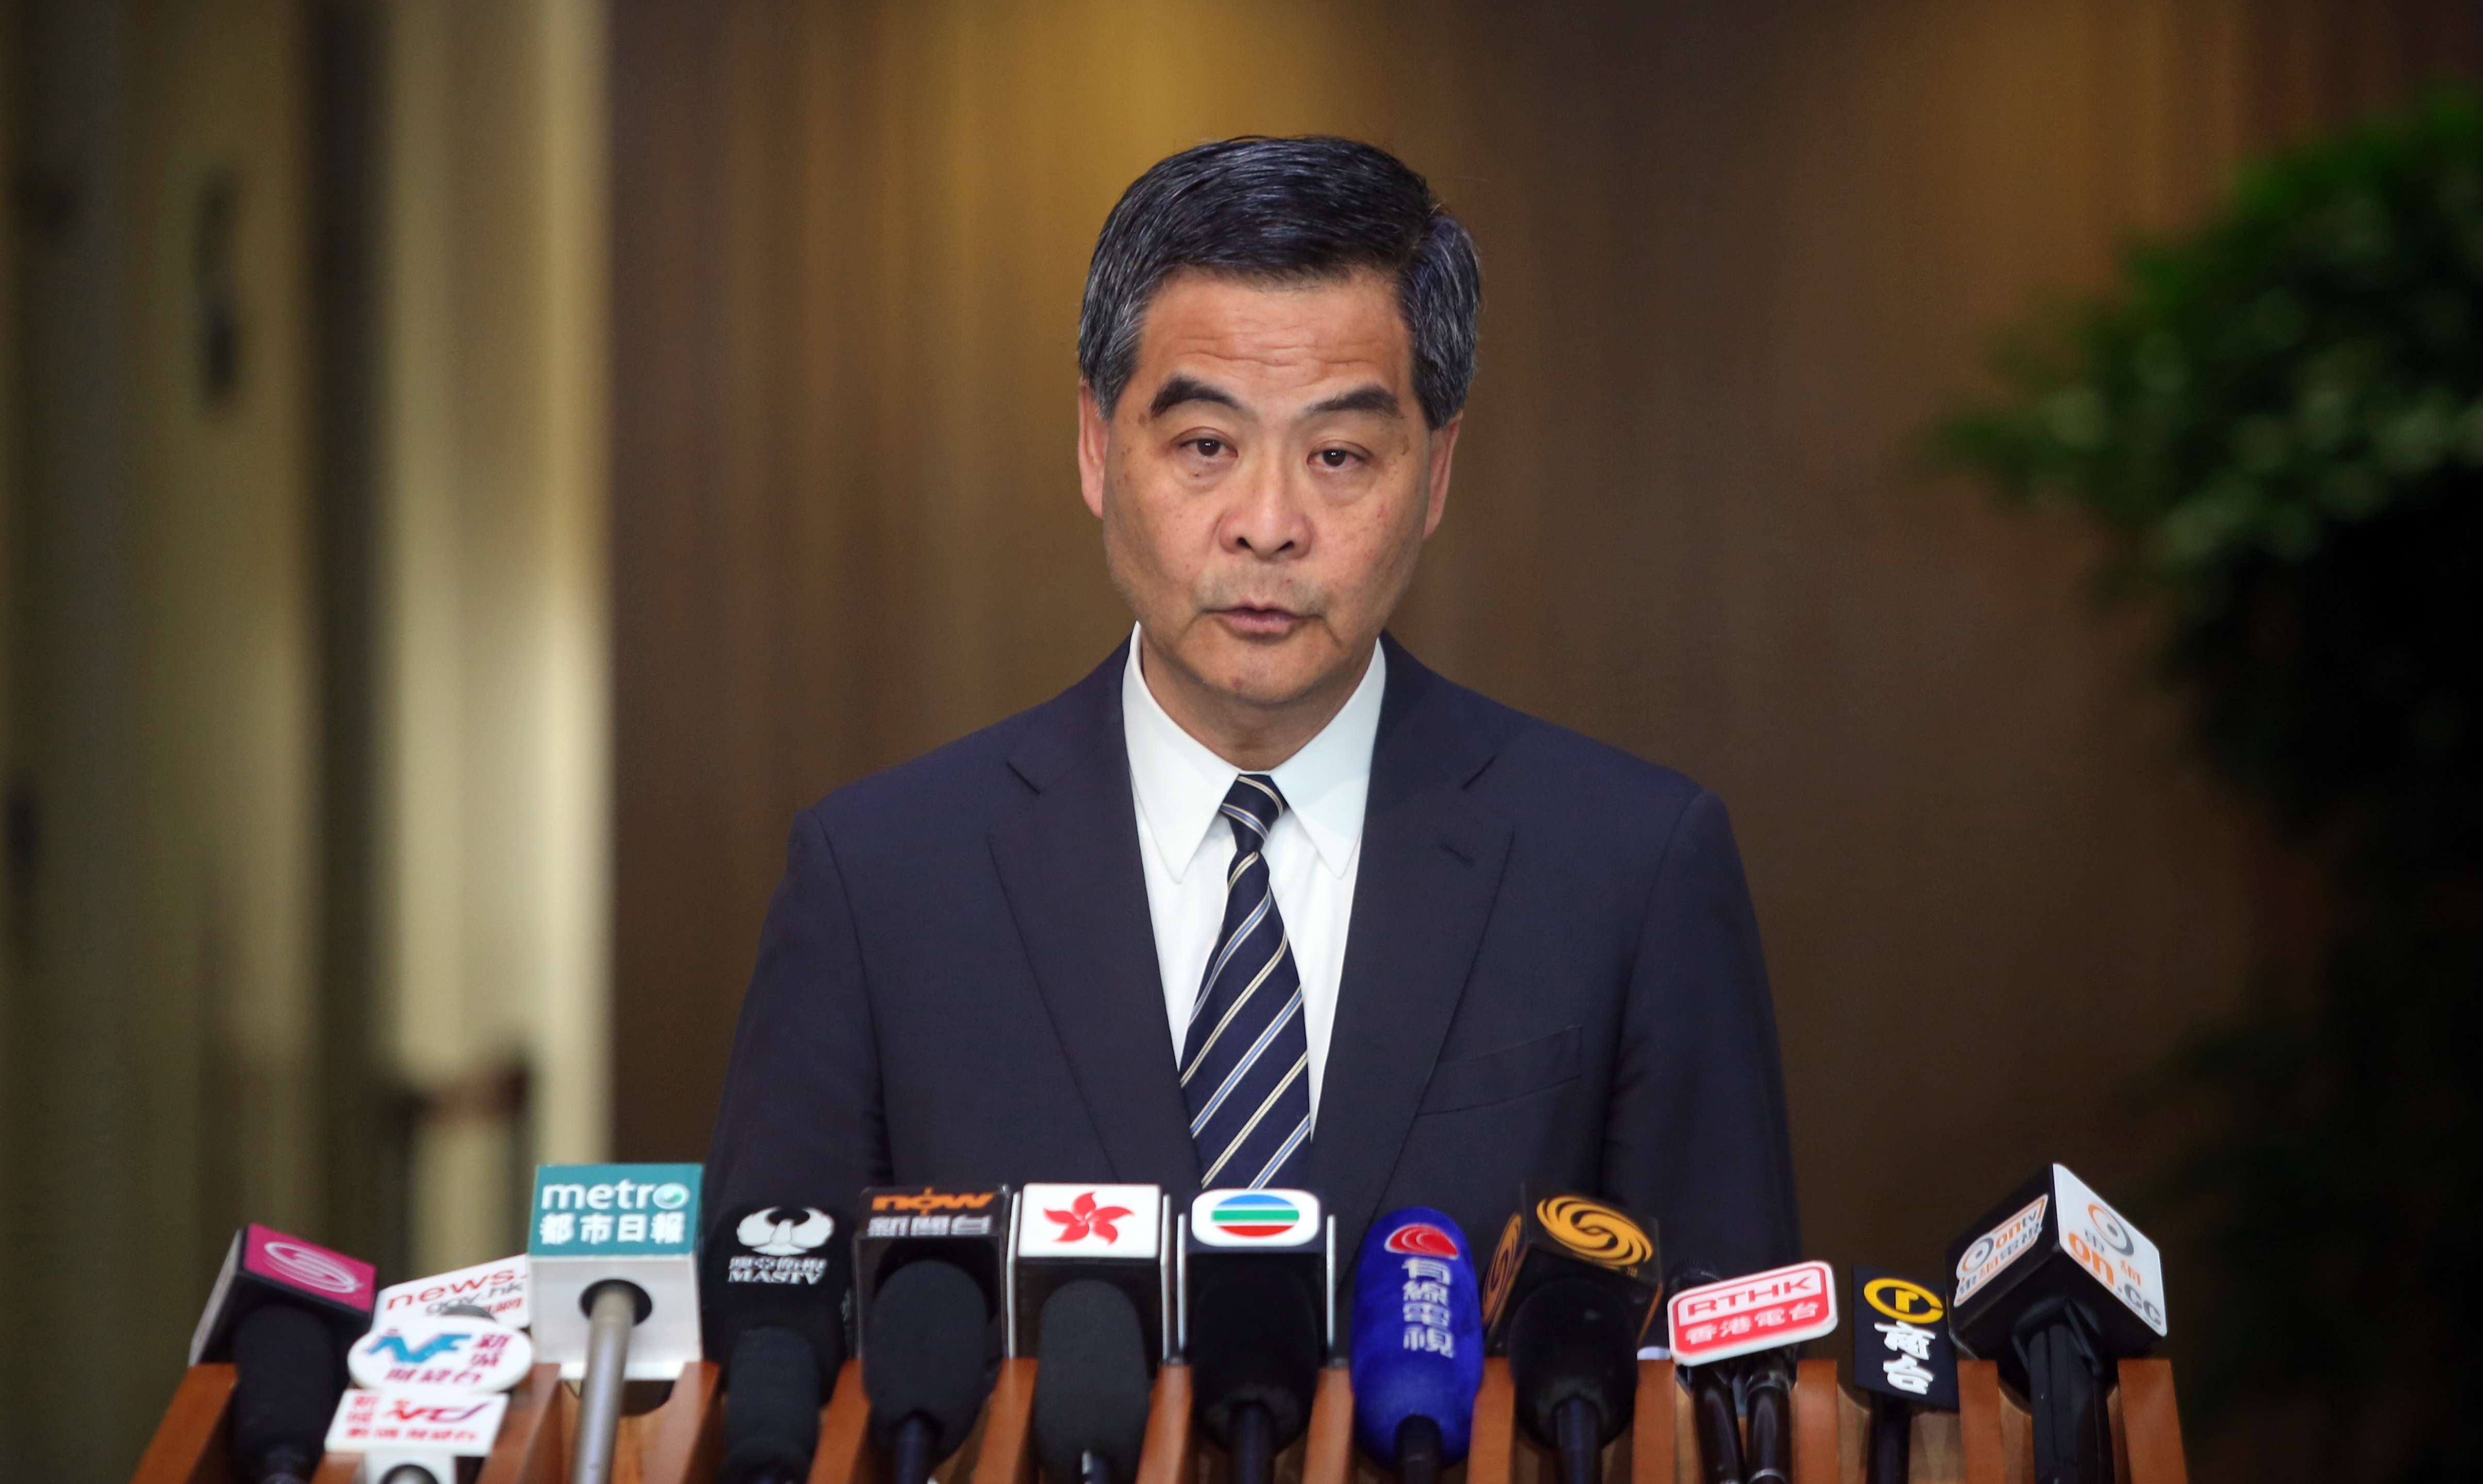 Chief Executive Leung Chun-ying did not reveal whether he would run for another term. Photo: Sam Tsang